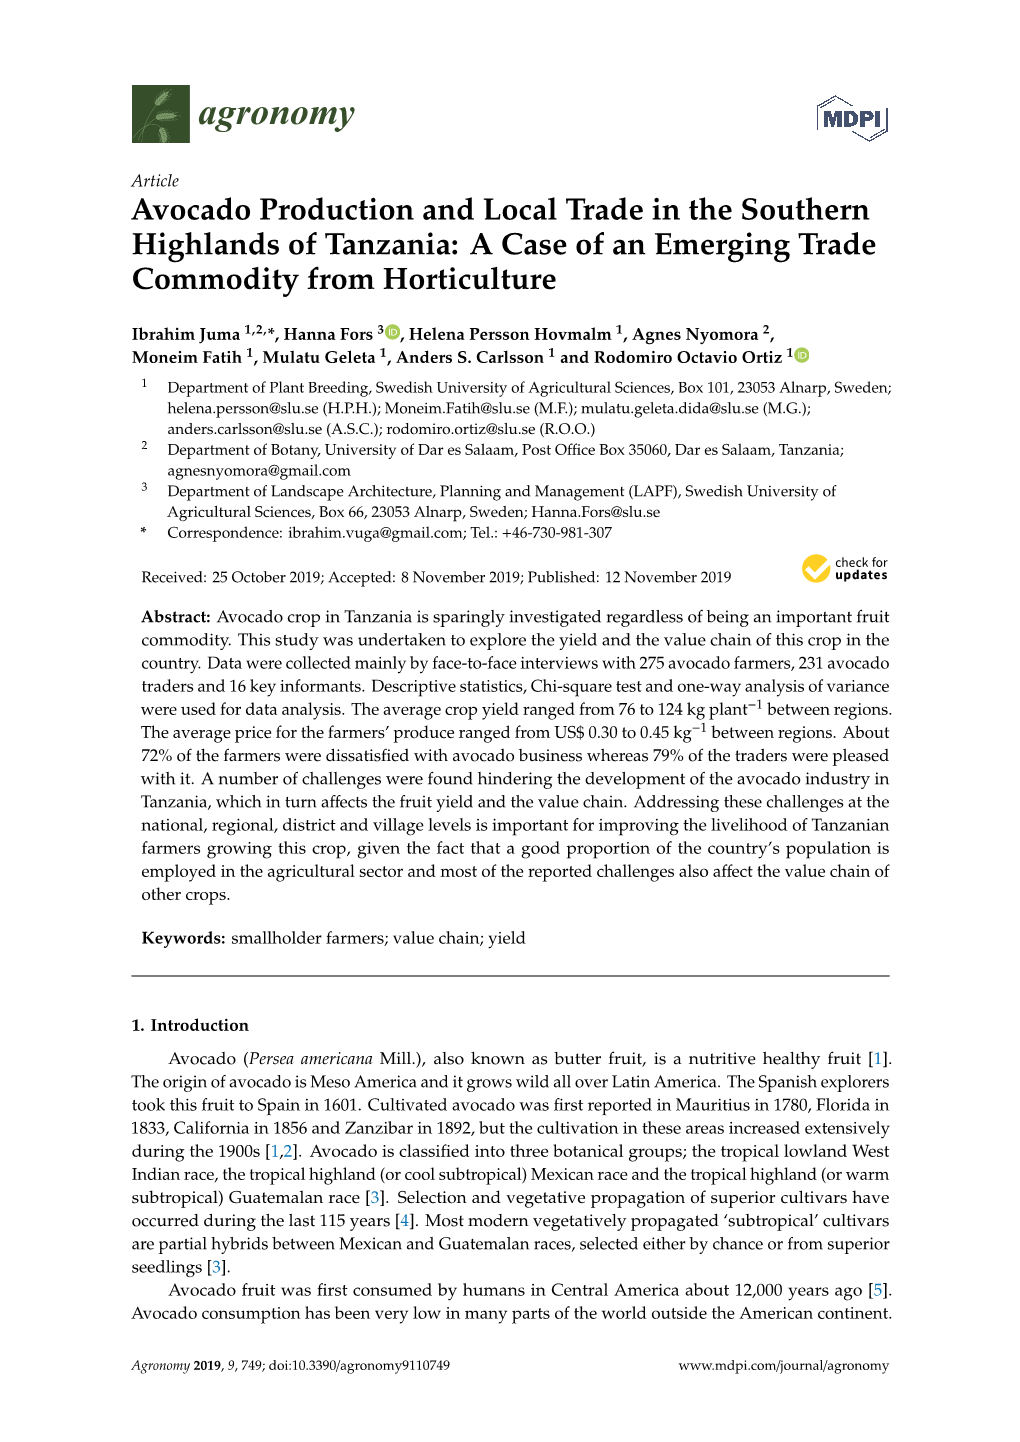 Avocado Production and Local Trade in the Southern Highlands of Tanzania: a Case of an Emerging Trade Commodity from Horticulture